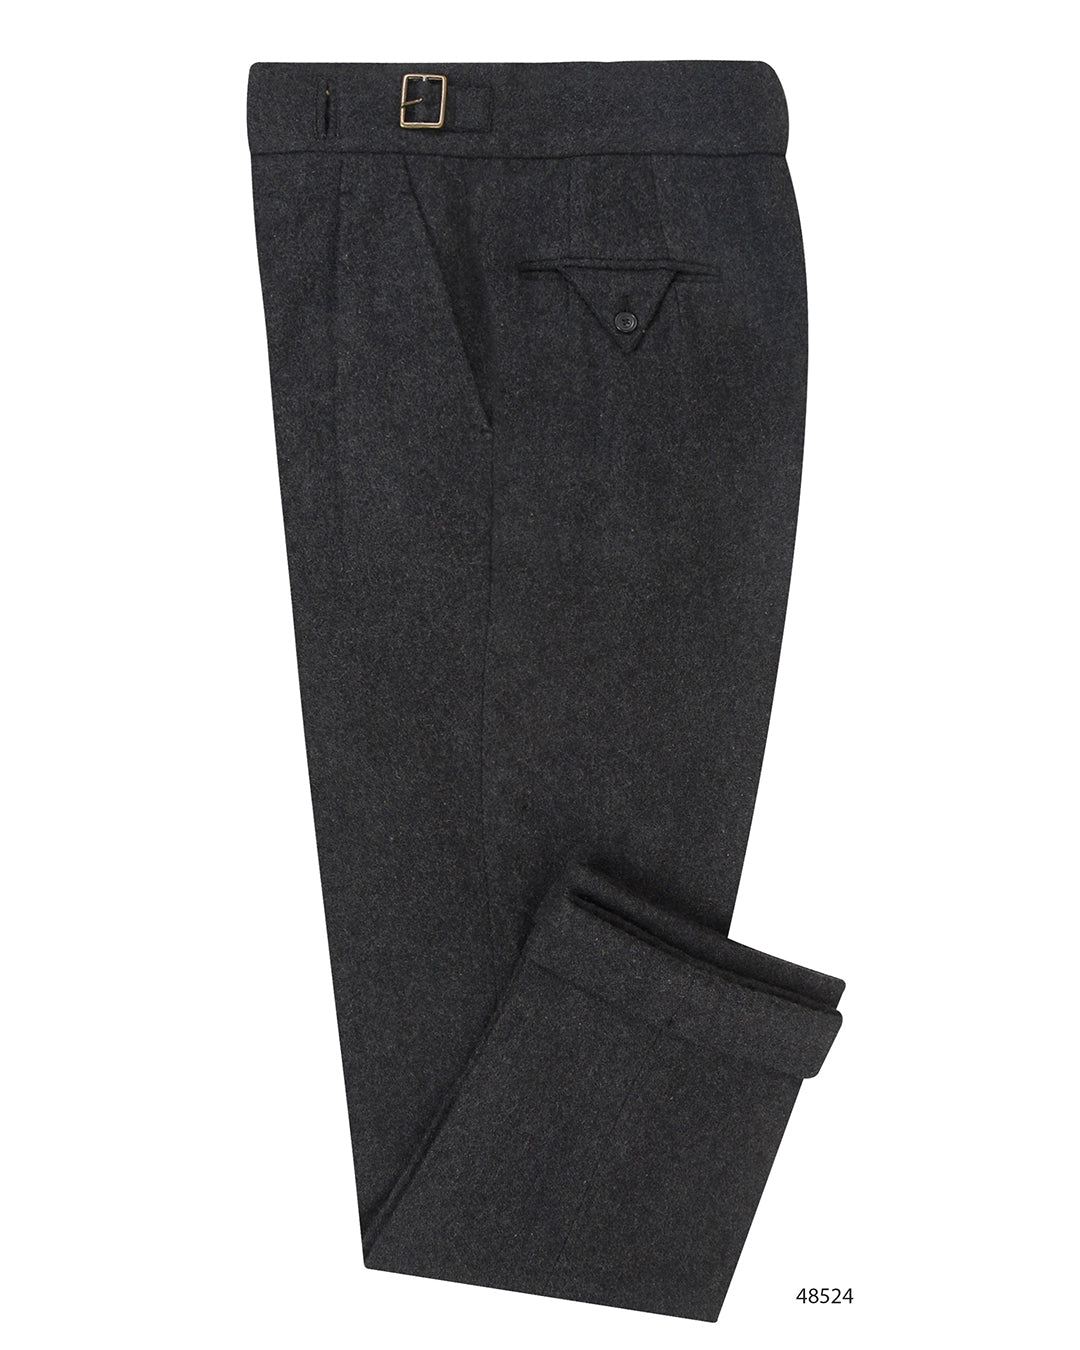 Side view of the Gurkha Pant in Charcoal Grey Wool